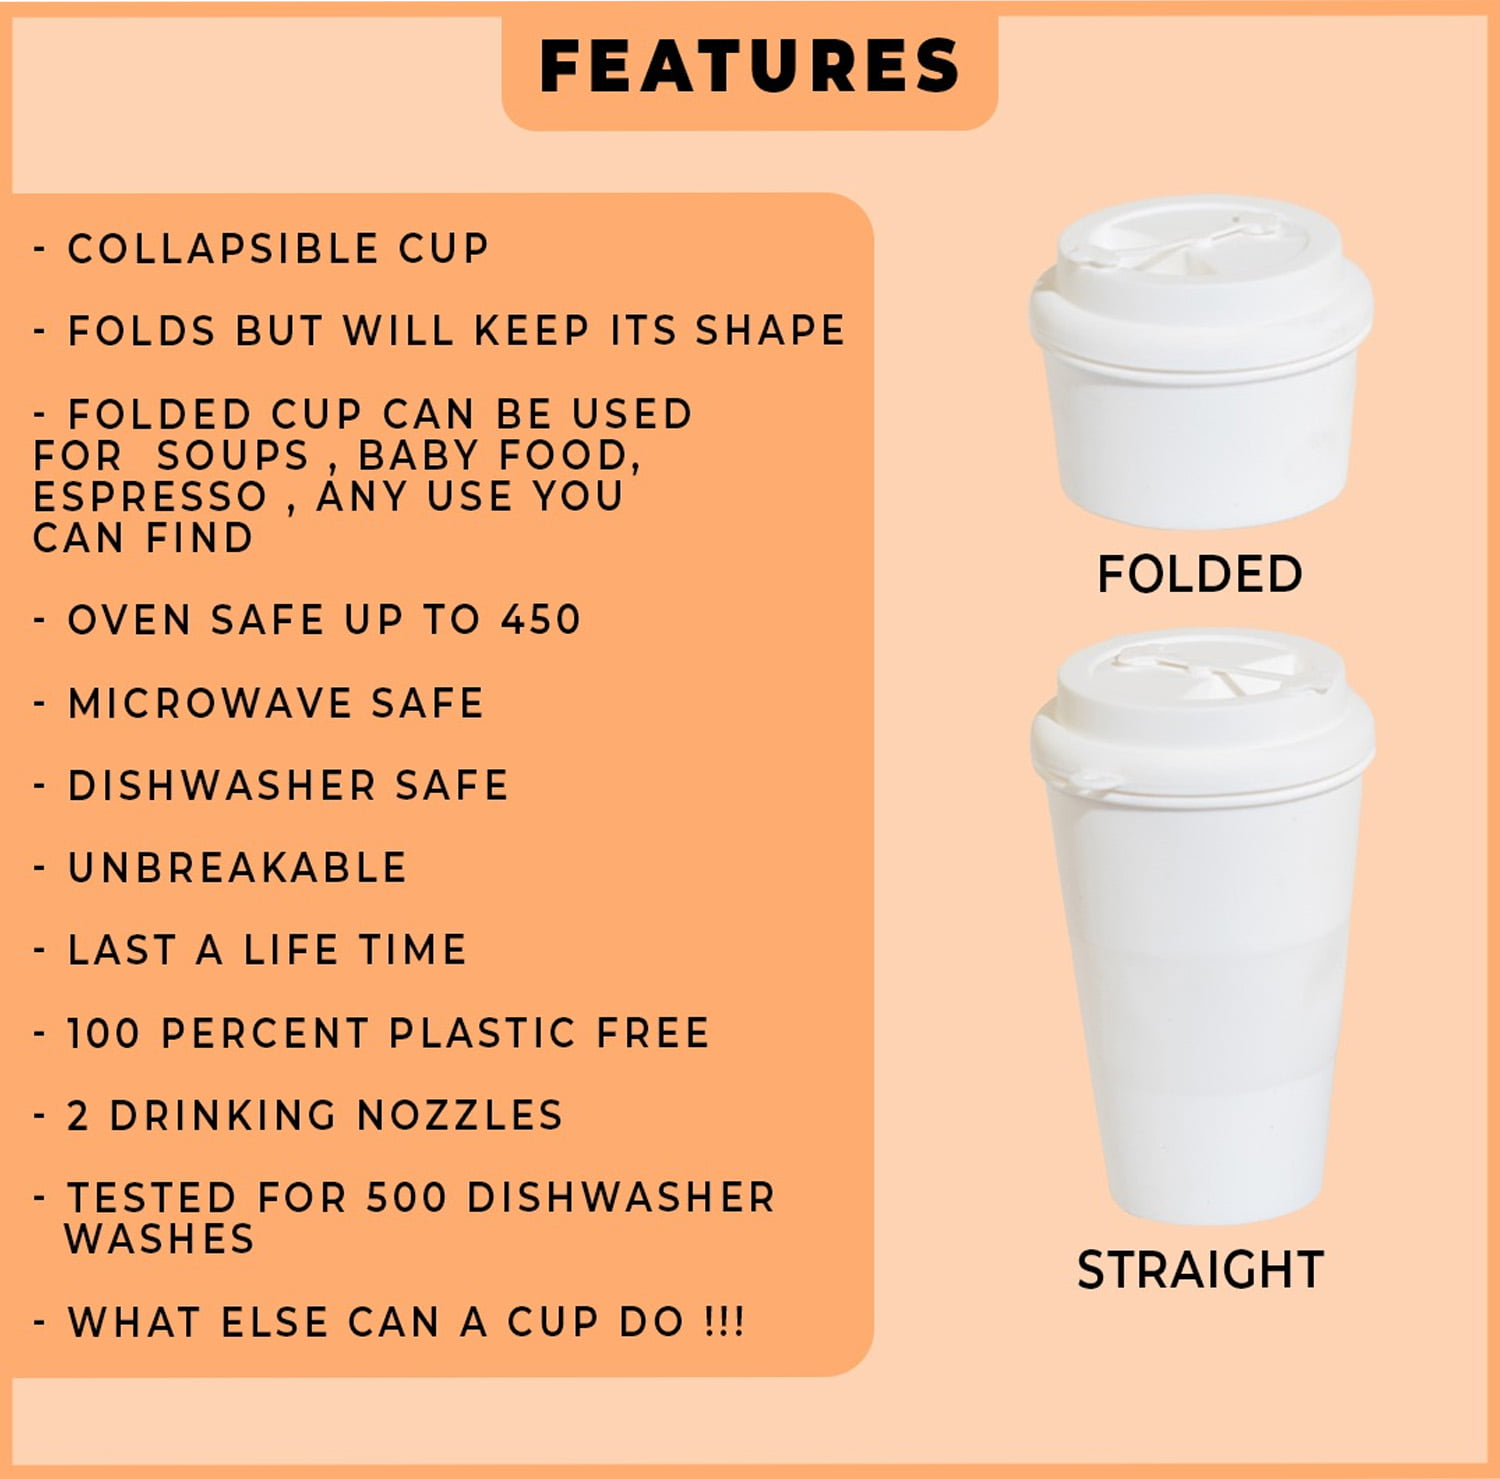 ITPCINC Reusable Silicone Cups for Coffee with Lids, Reusable